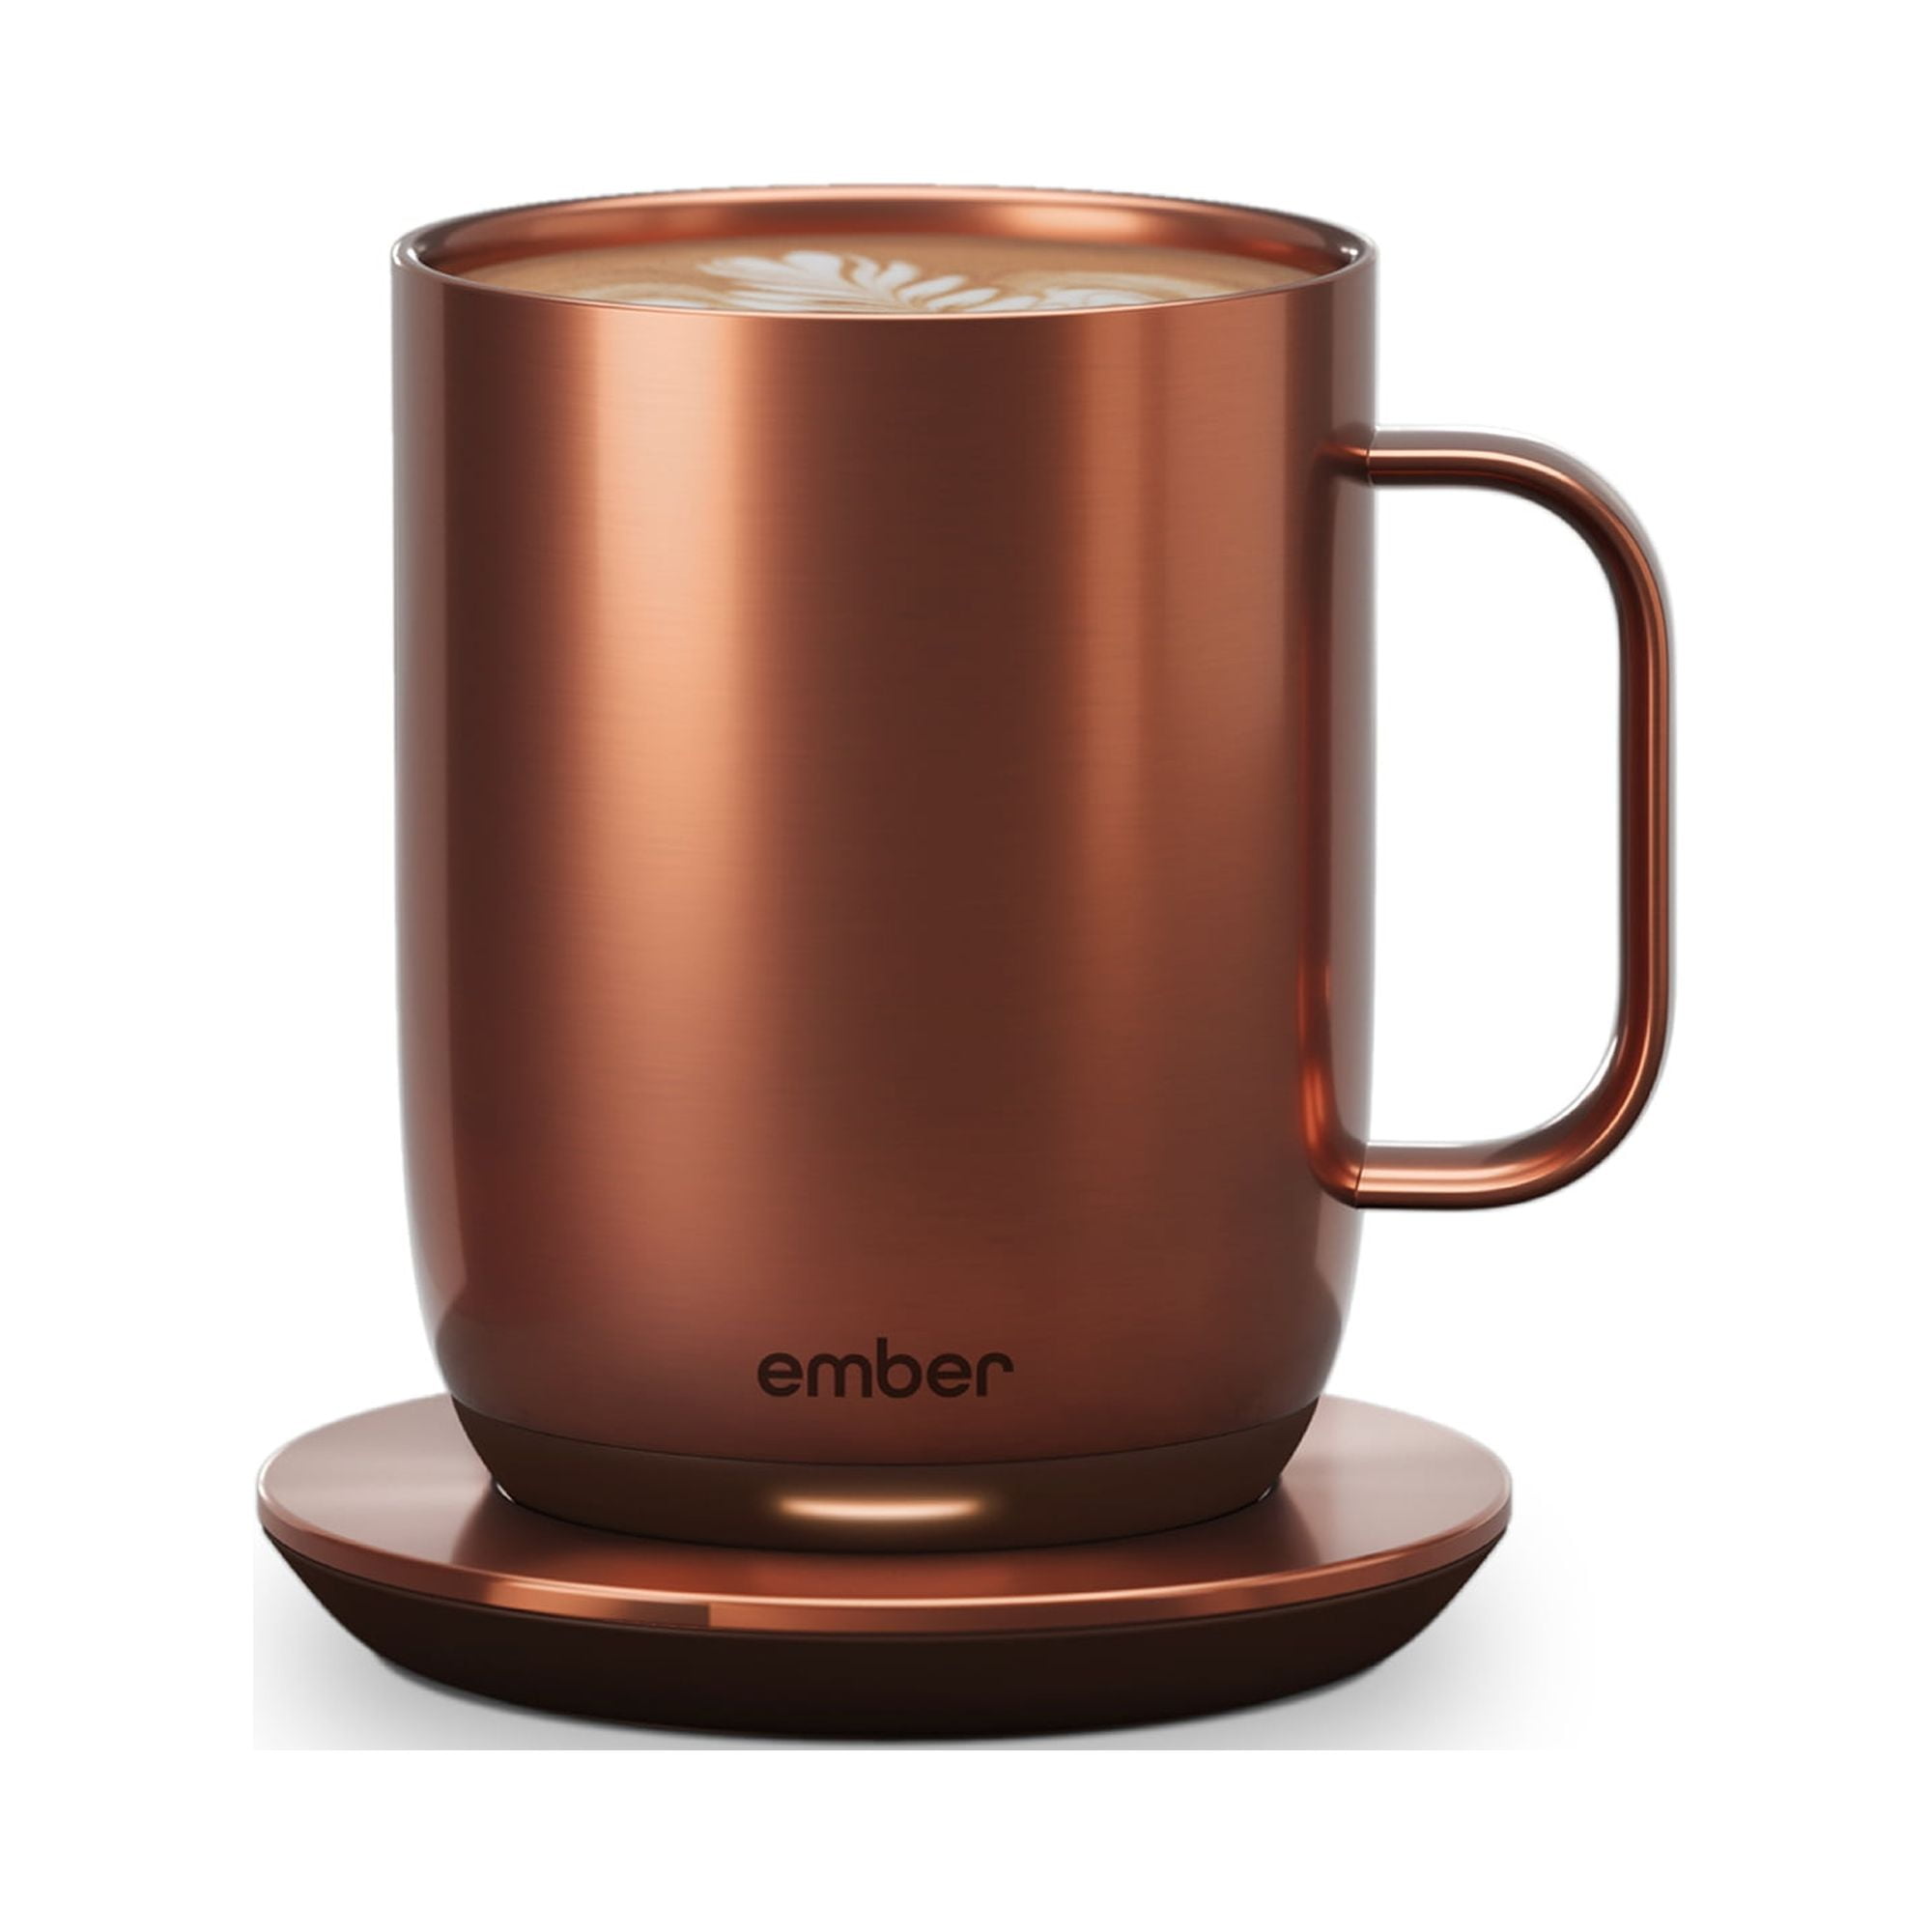 Ember - The best just got better. Our largest 14 oz Ember Mug² is